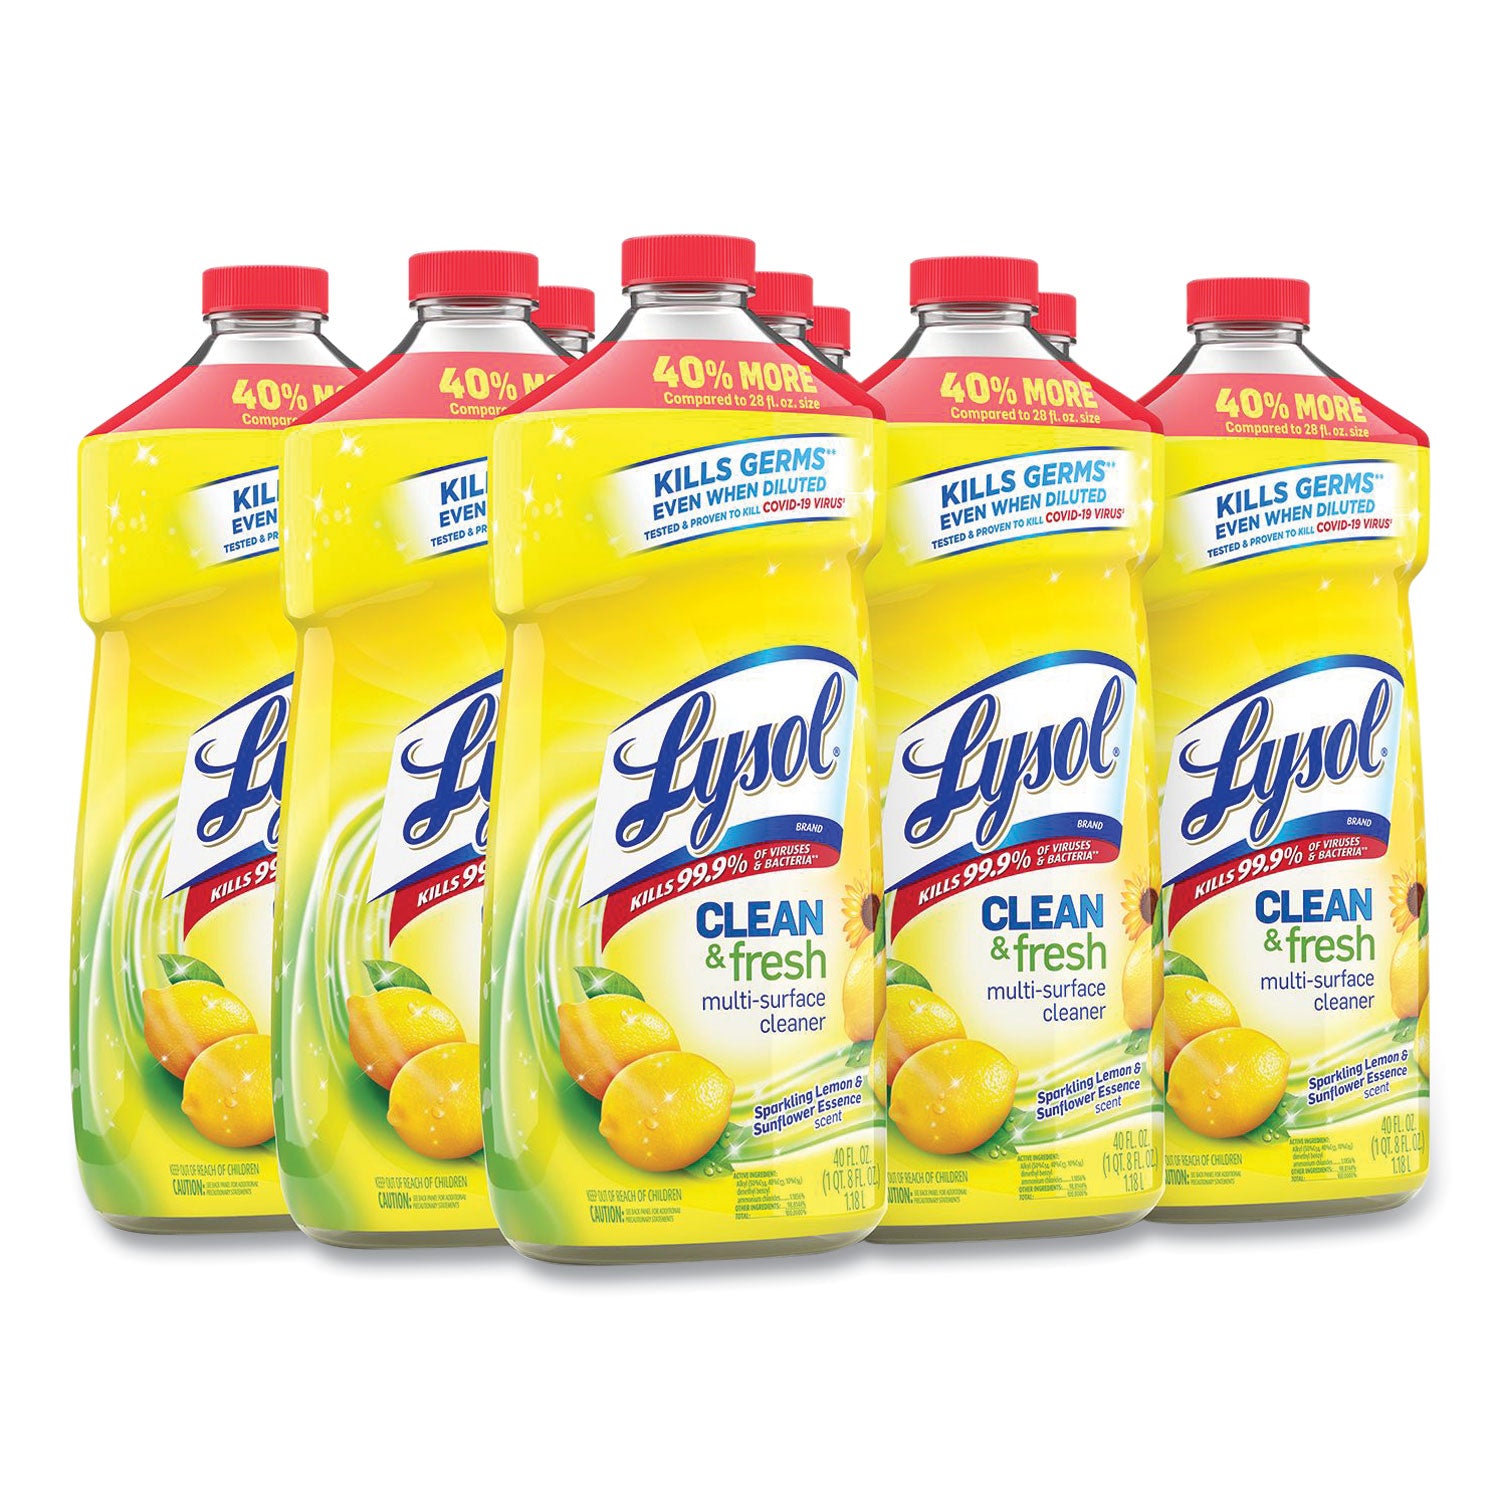 Clean and Fresh Multi-Surface Cleaner, Sparkling Lemon and Sunflower Essence Scent, 40 oz Bottle - 